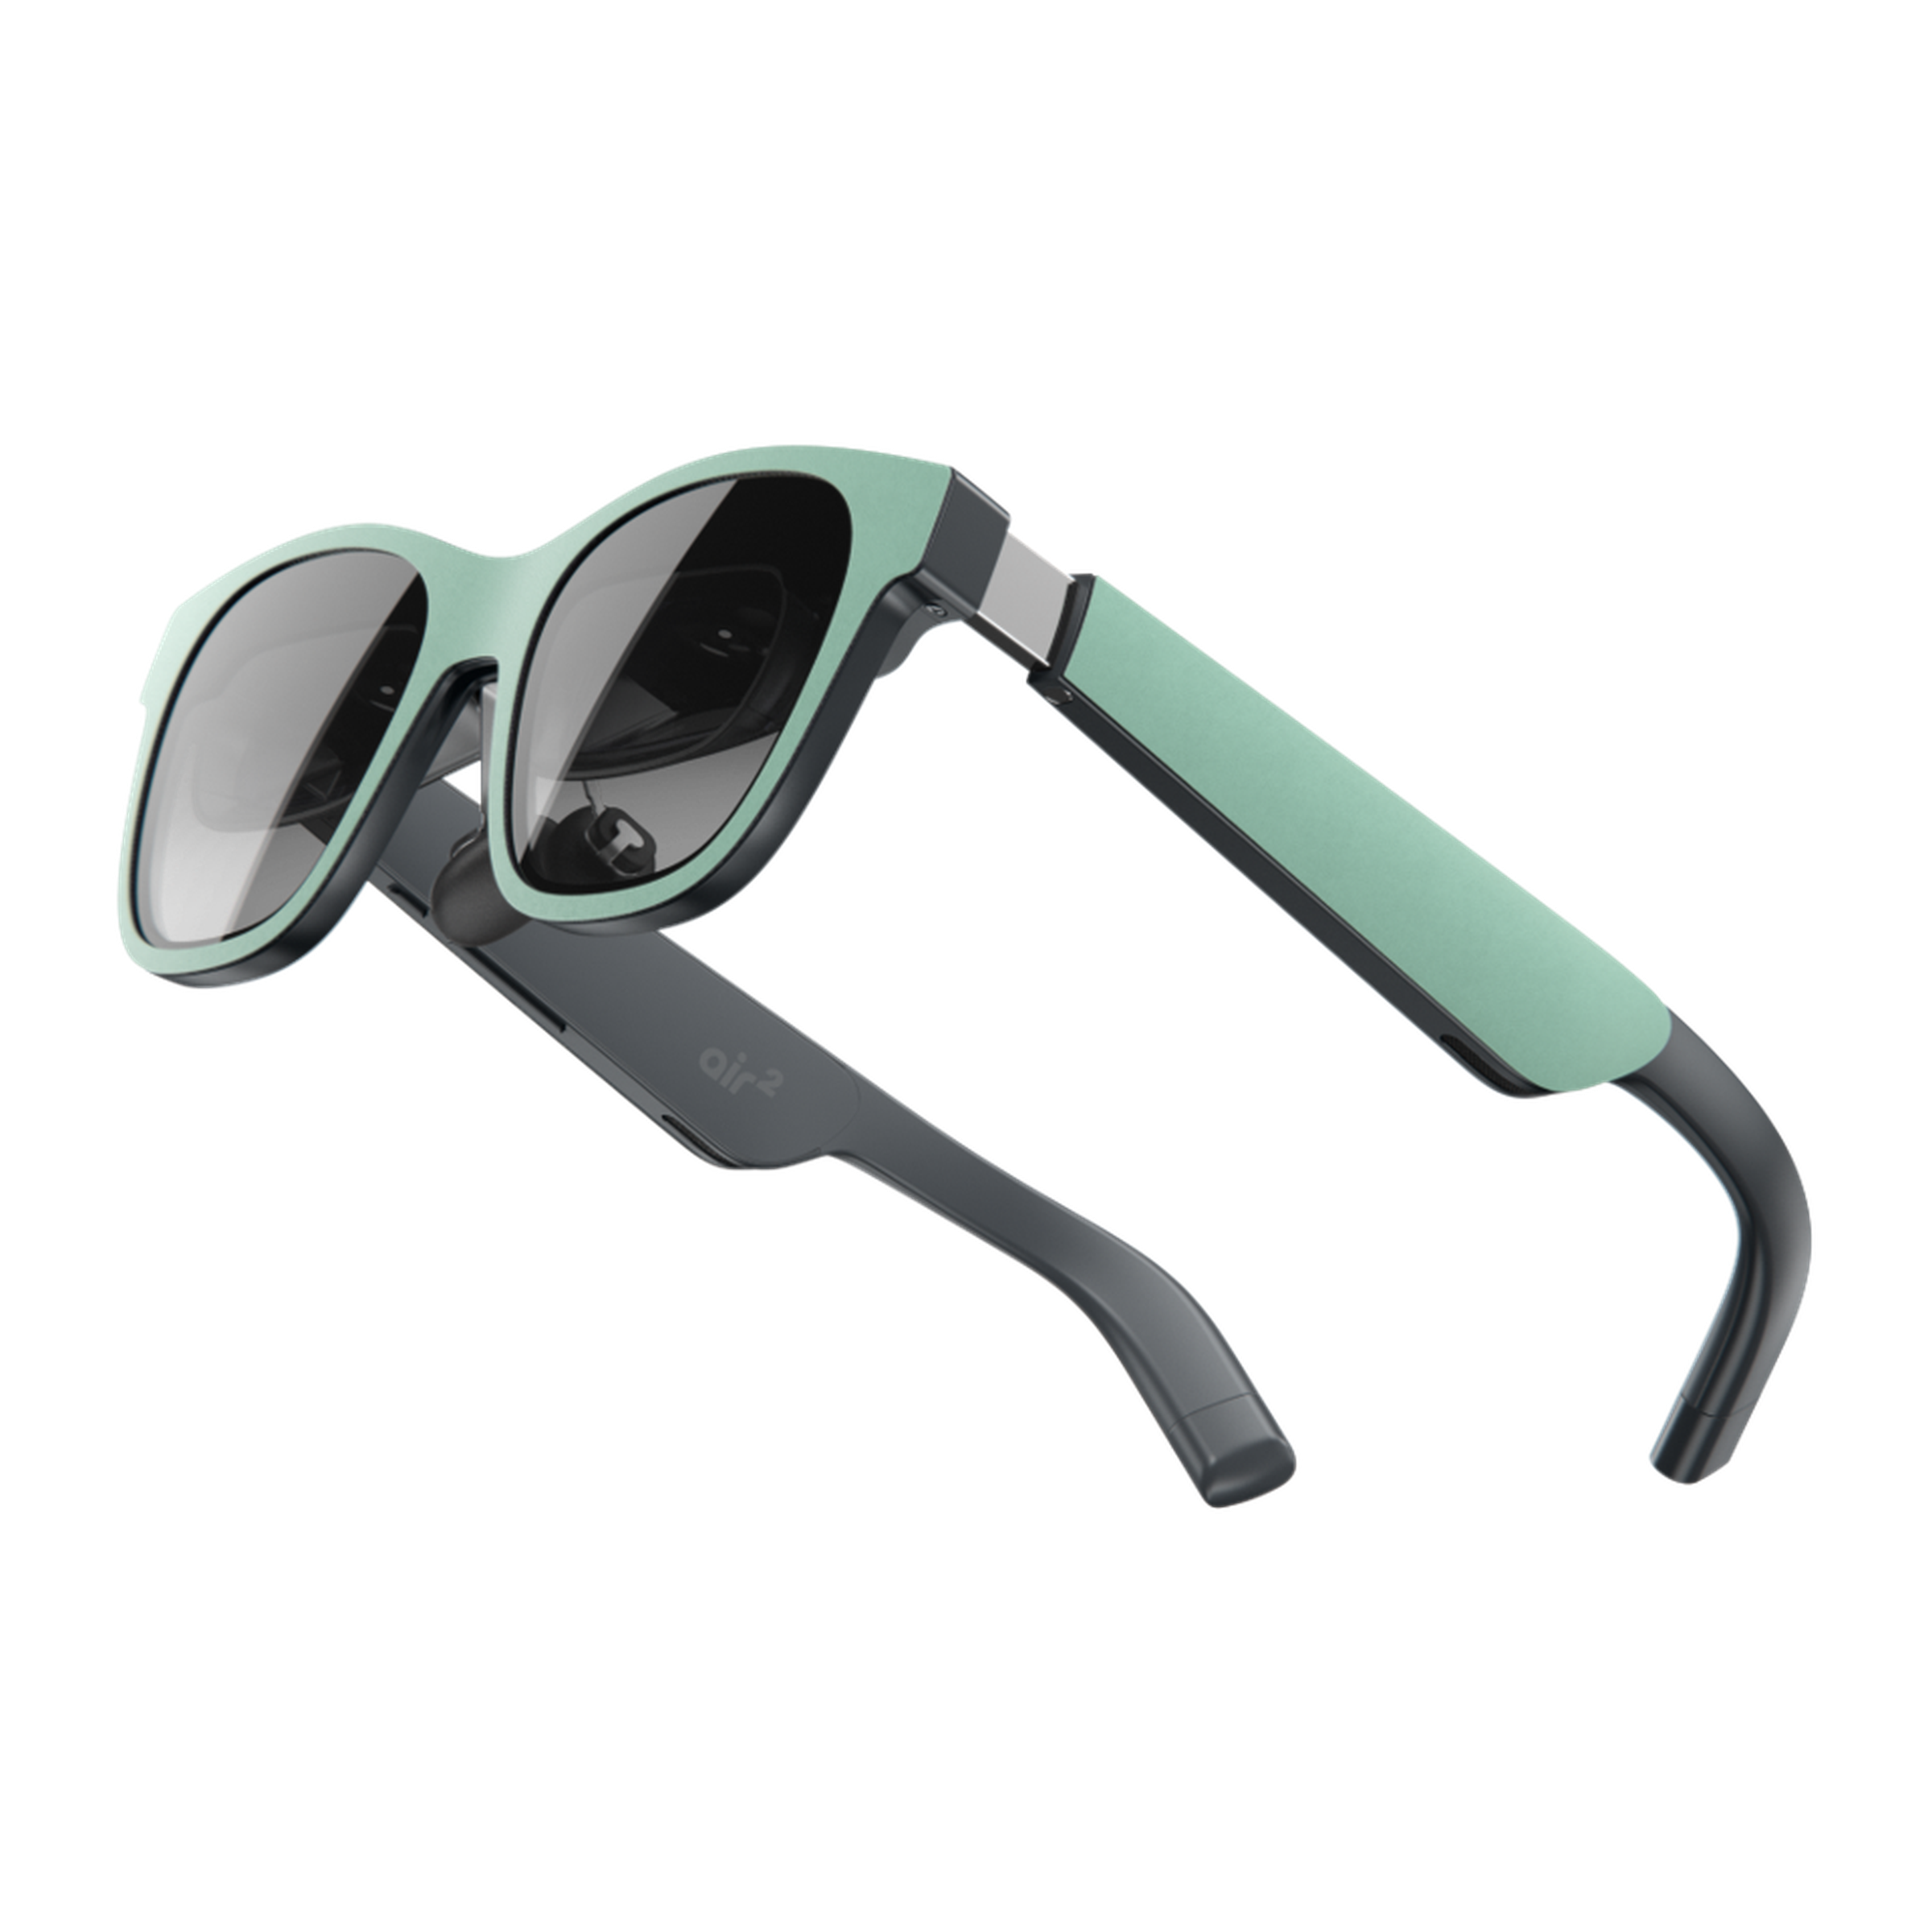 A pair of Xreal Air 2 glasses with stick-on green front and side plates.